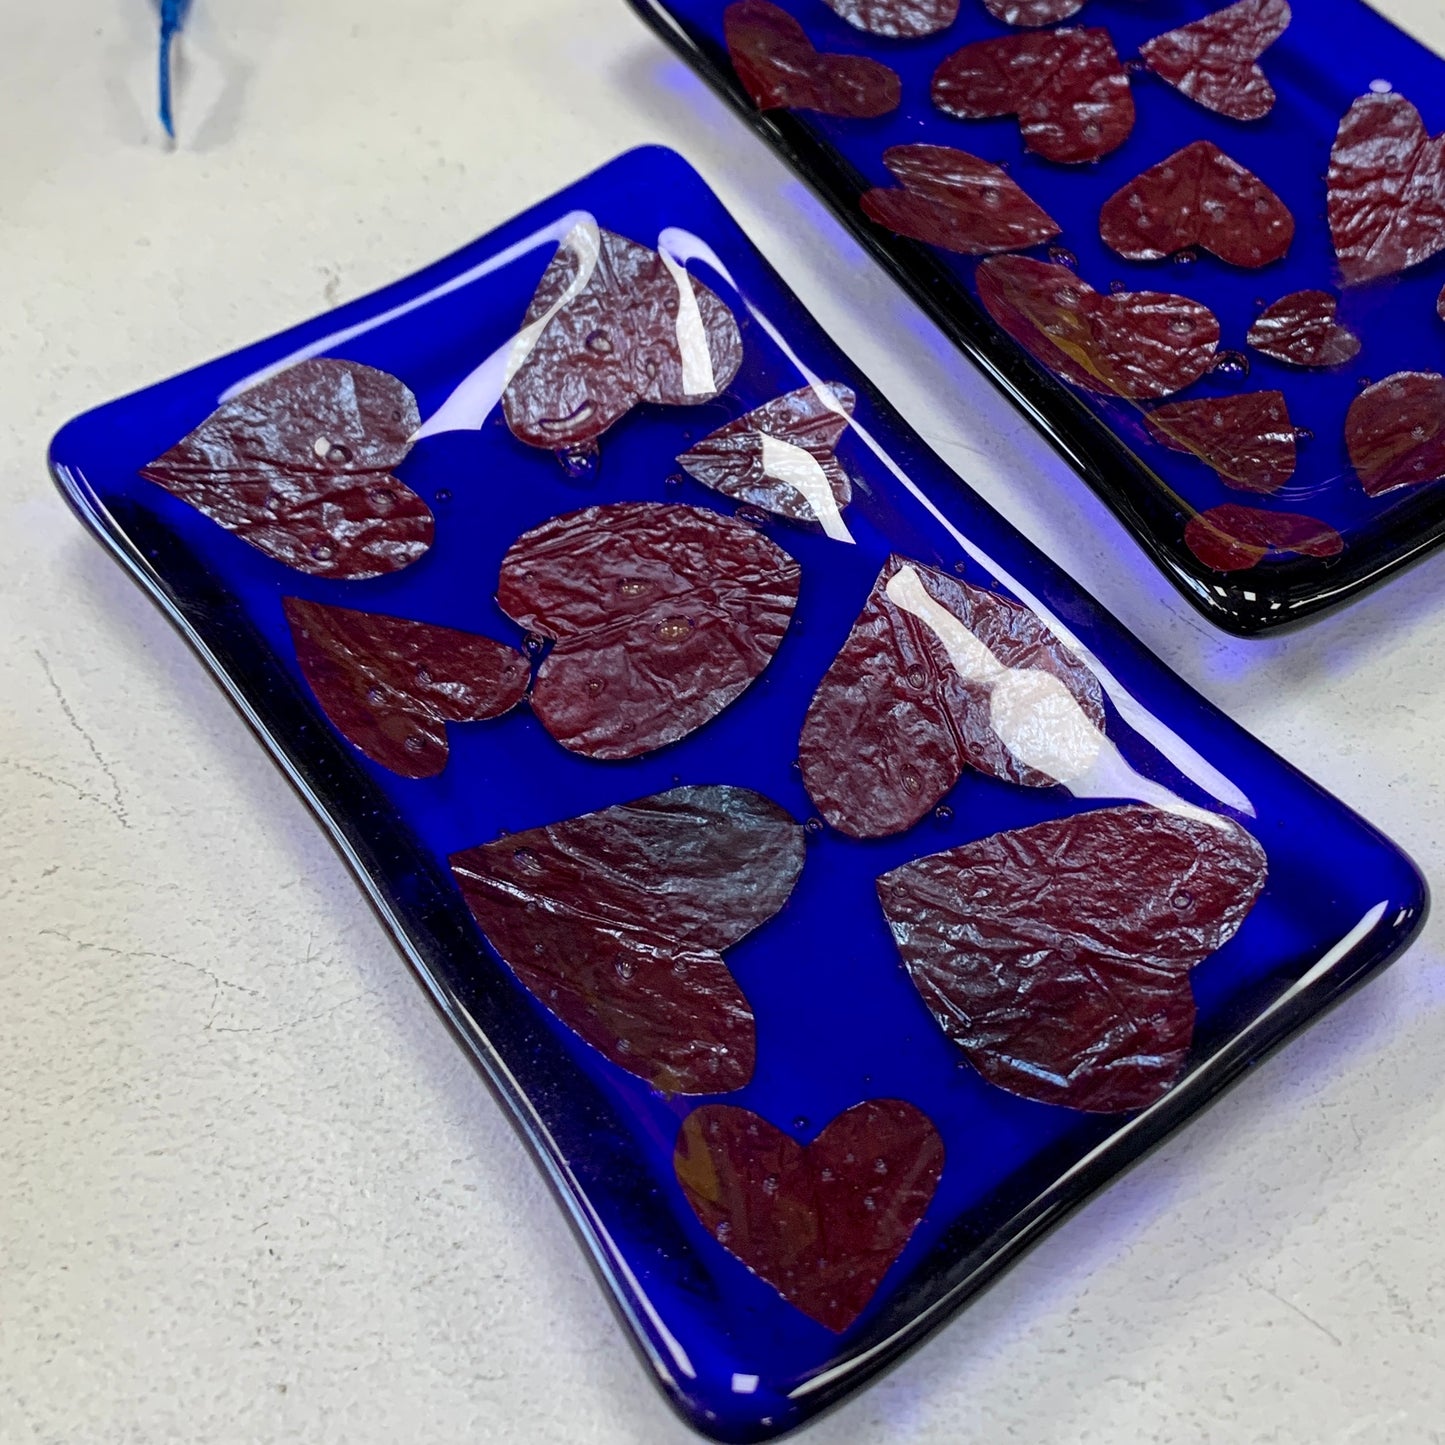 Bristol Blue Glass fused trinket dish or soap dish with Rusty red hearts fused between the glass. Handmade in Bristol.